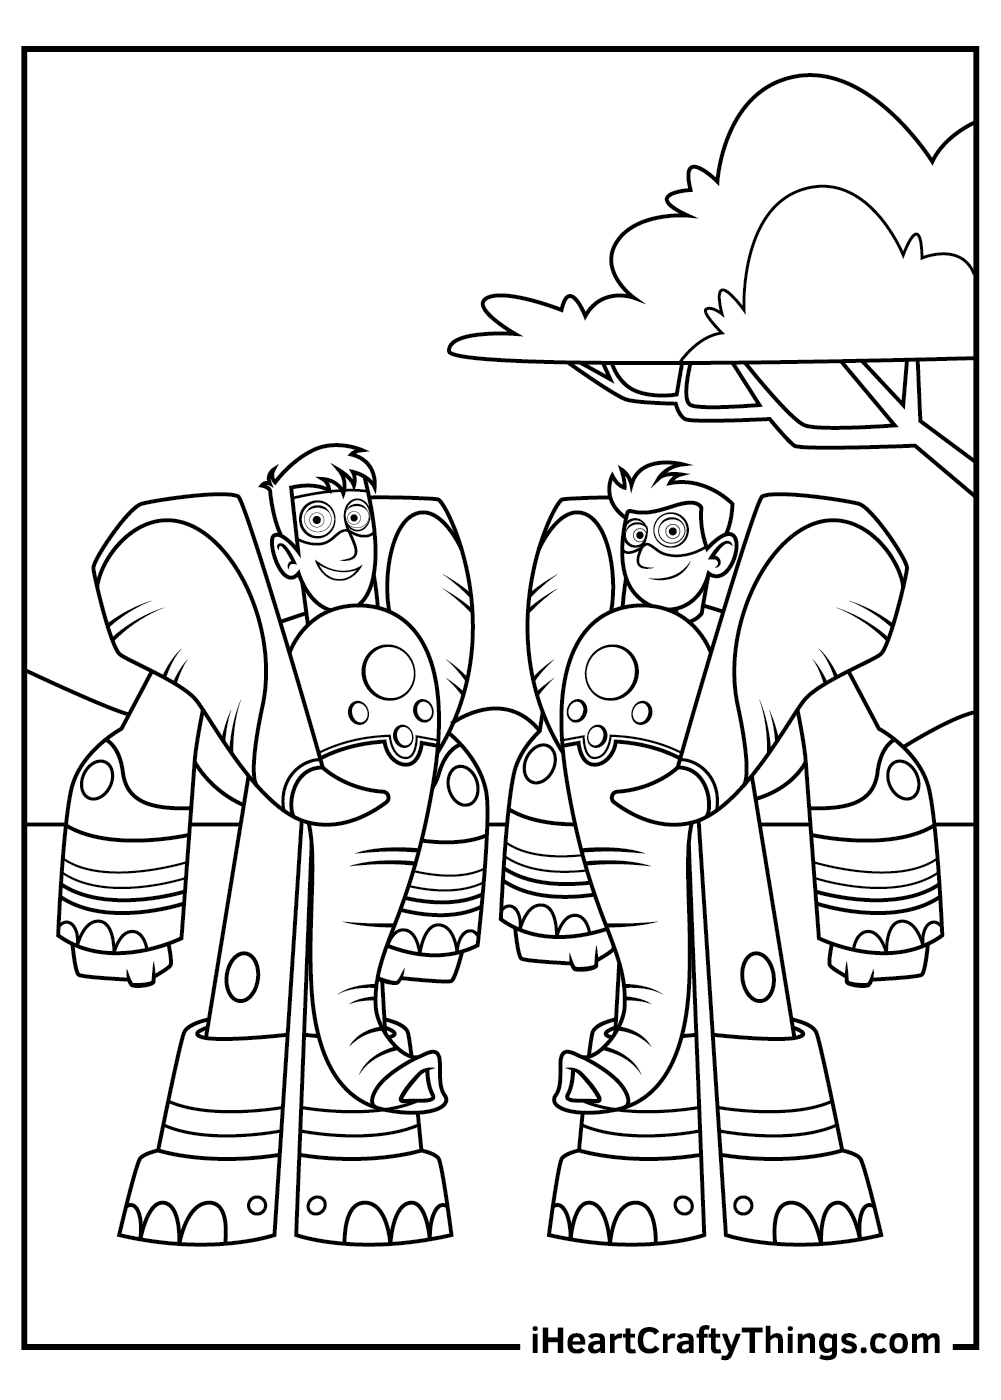 Printable Wild Kratts Coloring Pages ...